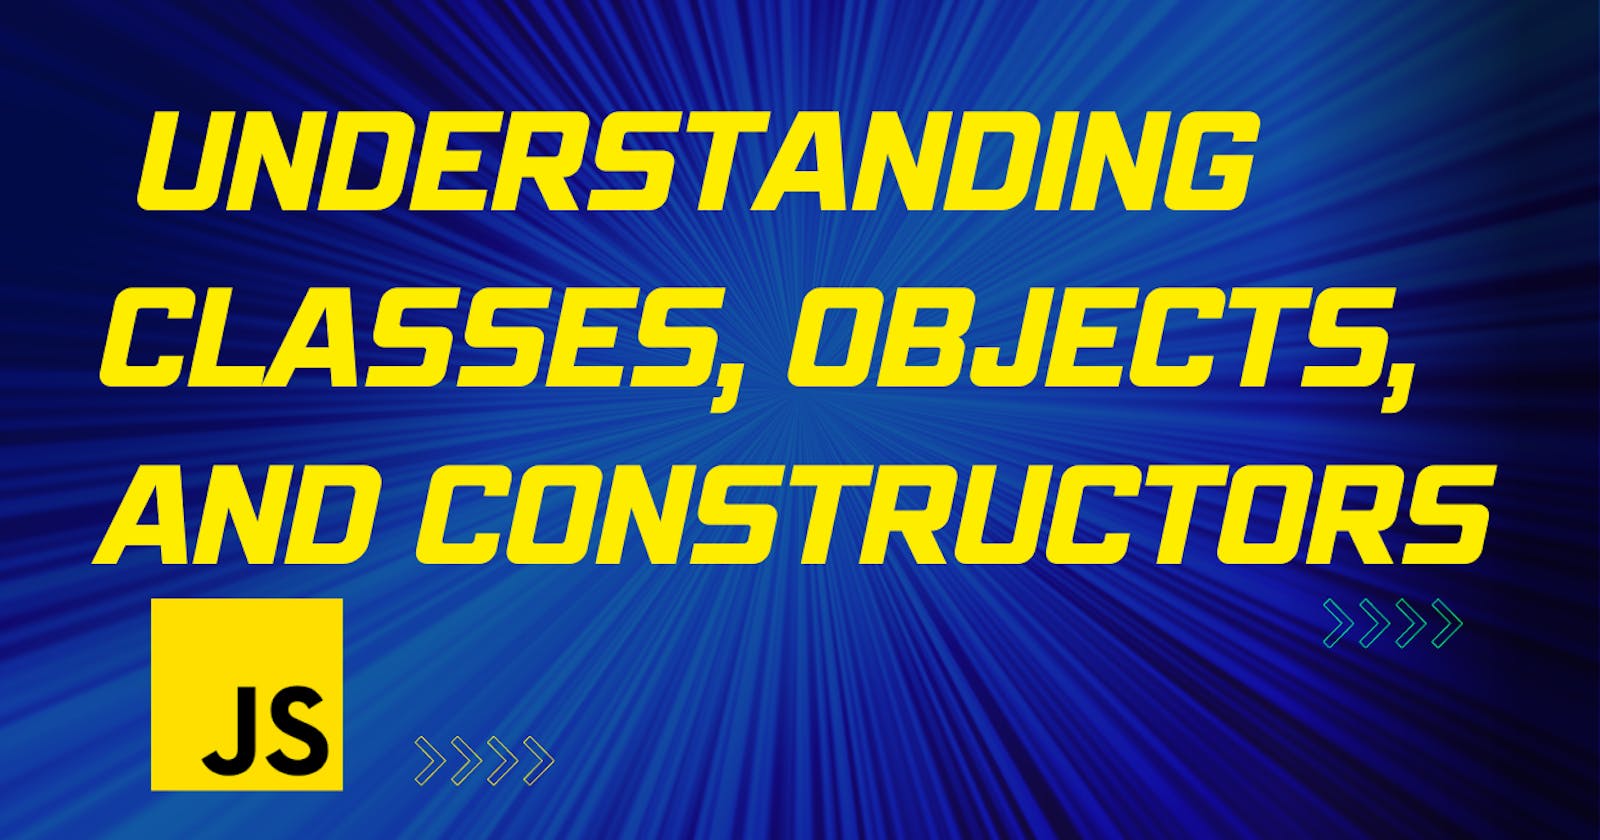 Understanding Classes, Objects, and Constructors in JavaScript